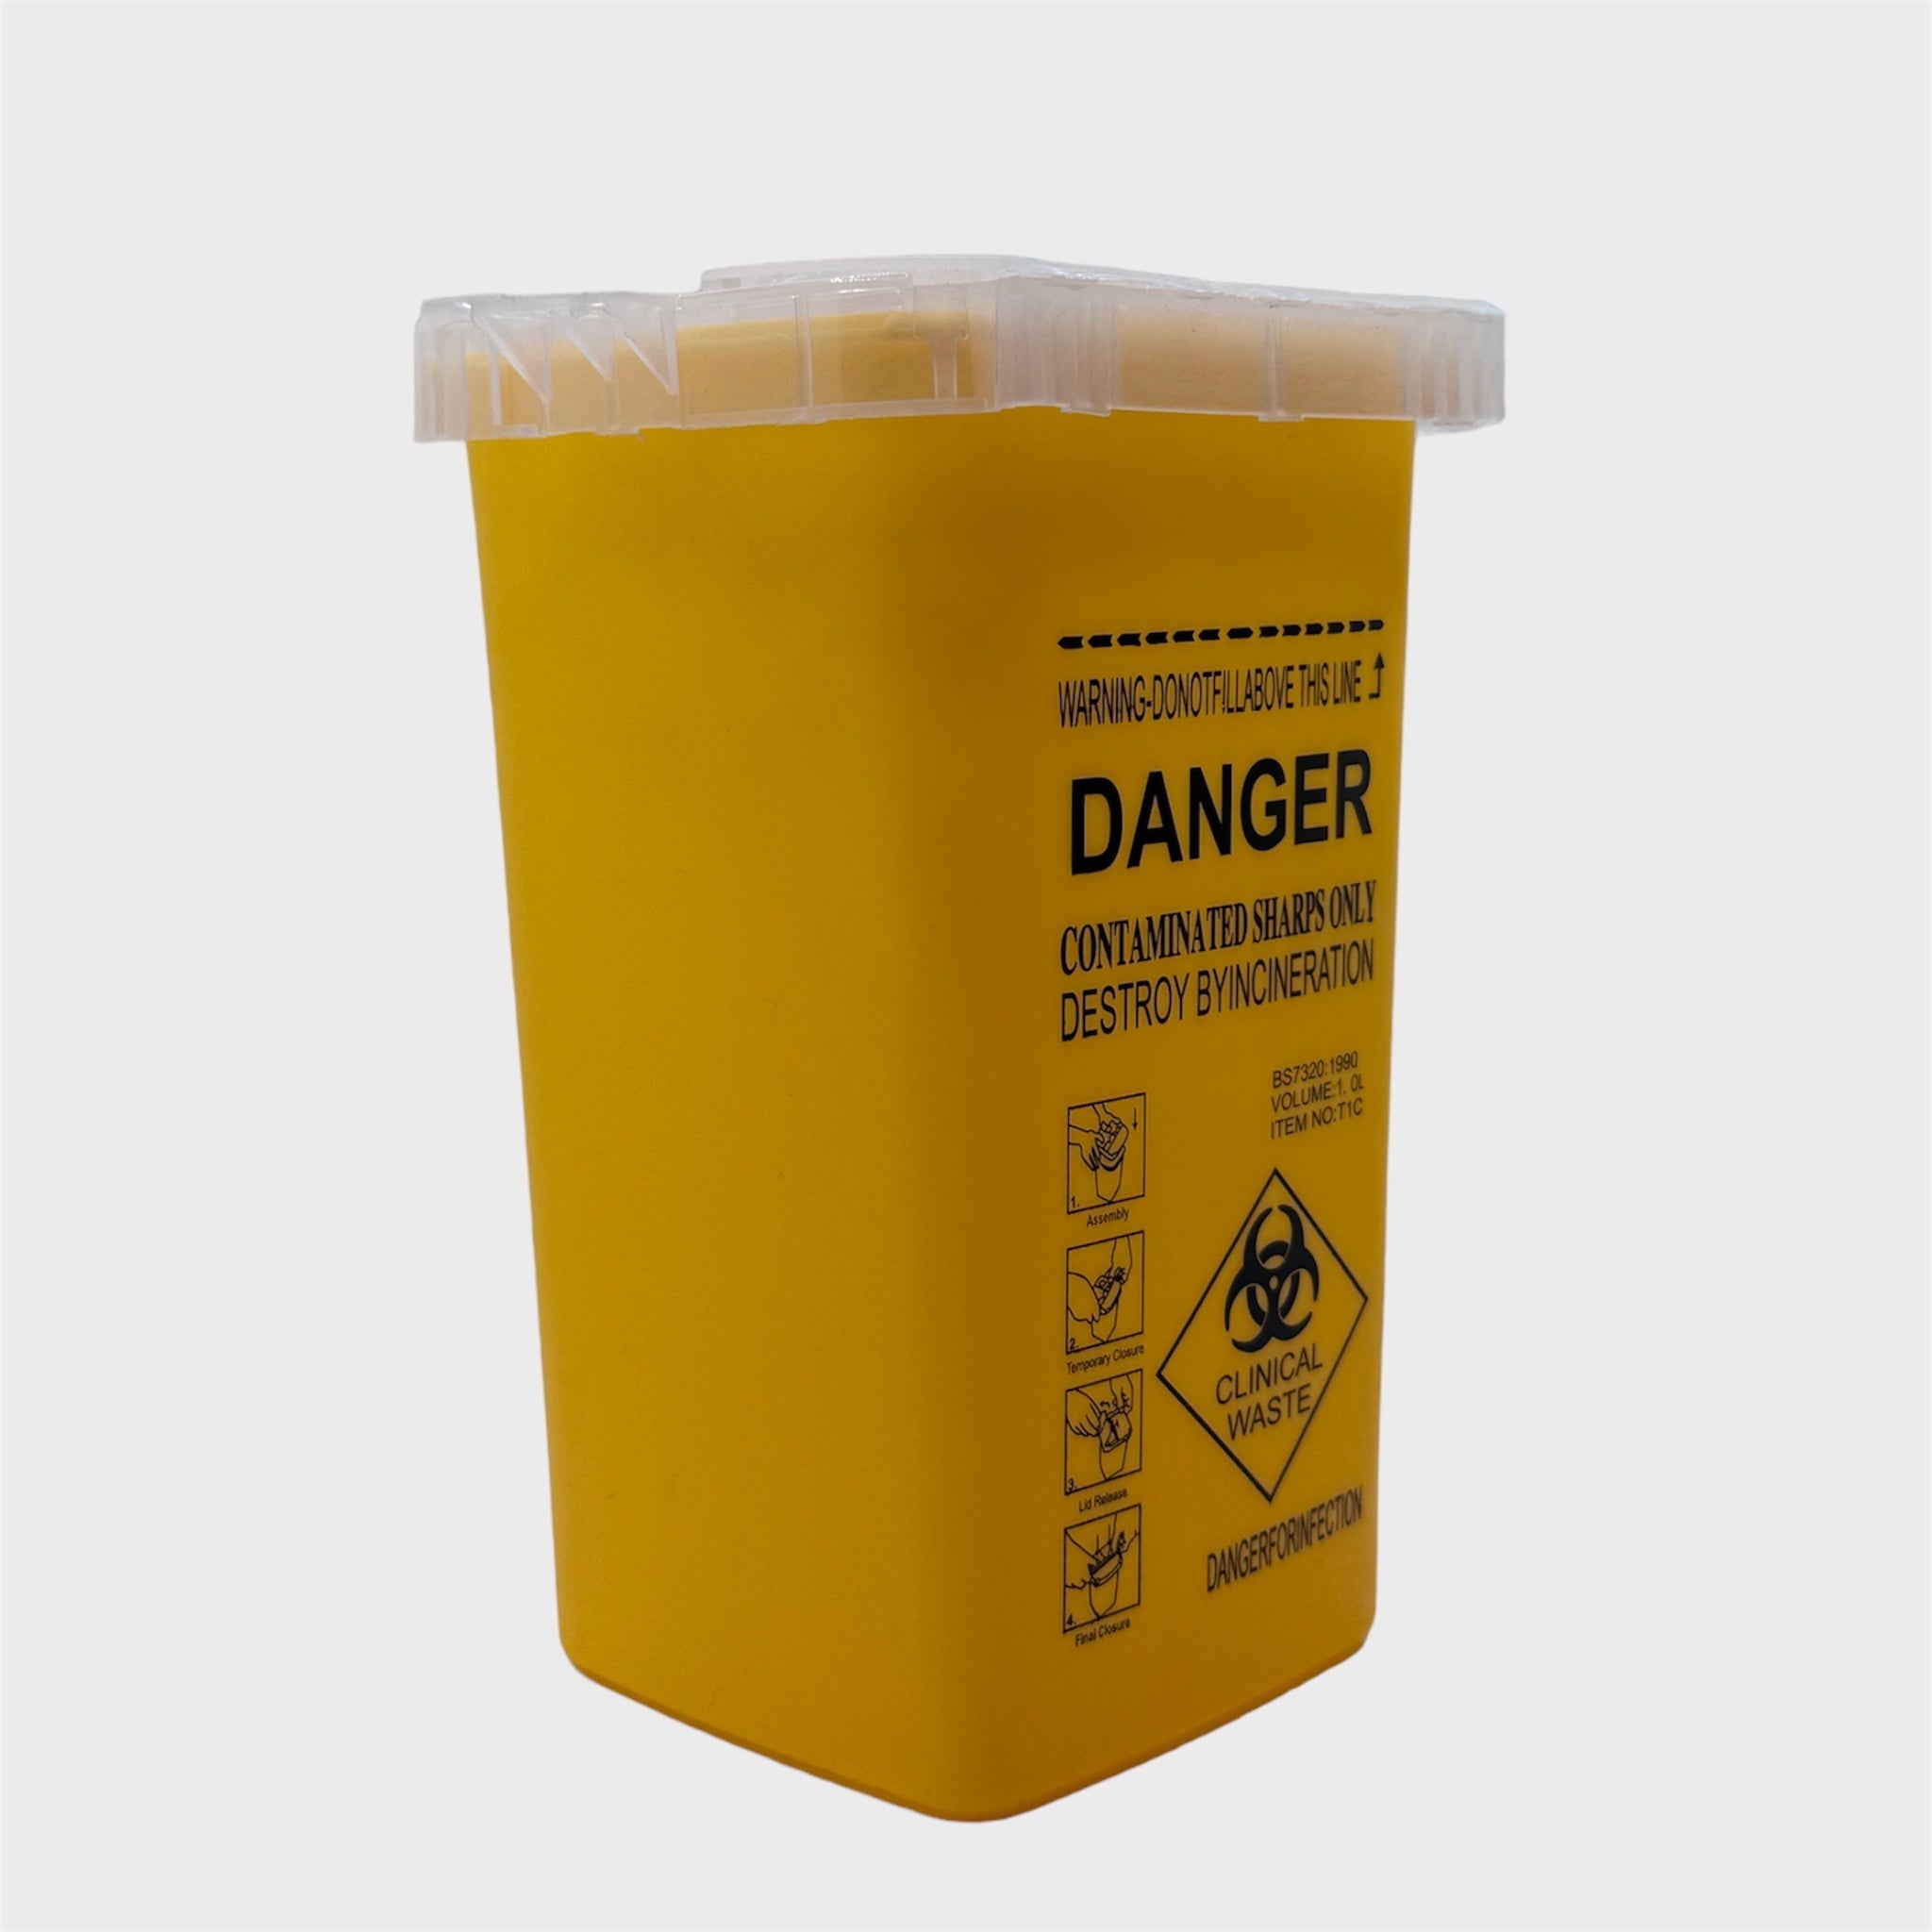 Safety container for sharps waste - 1L capacity